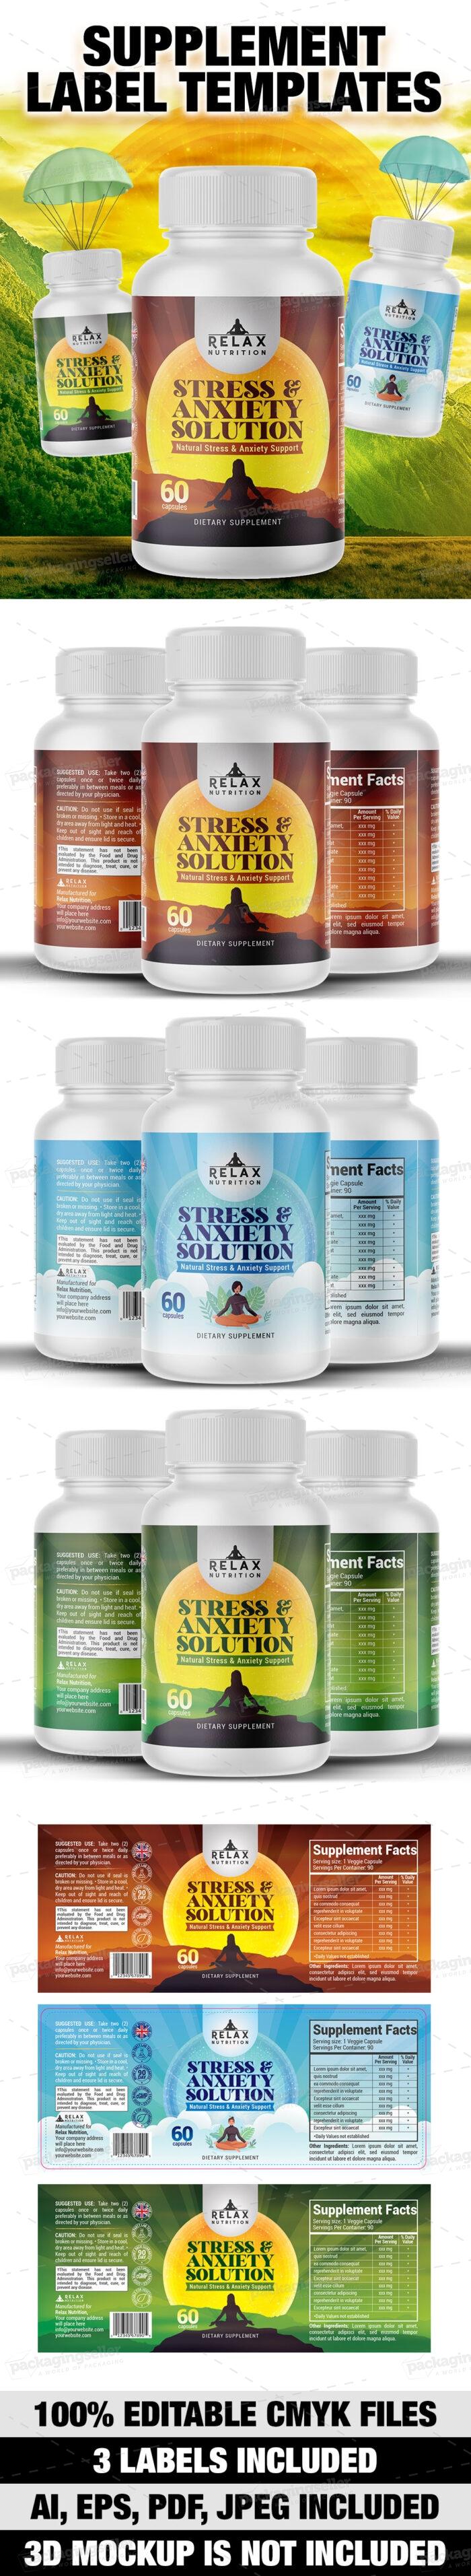 This Supplement Label Design template is created for Dietary Supplement but you can